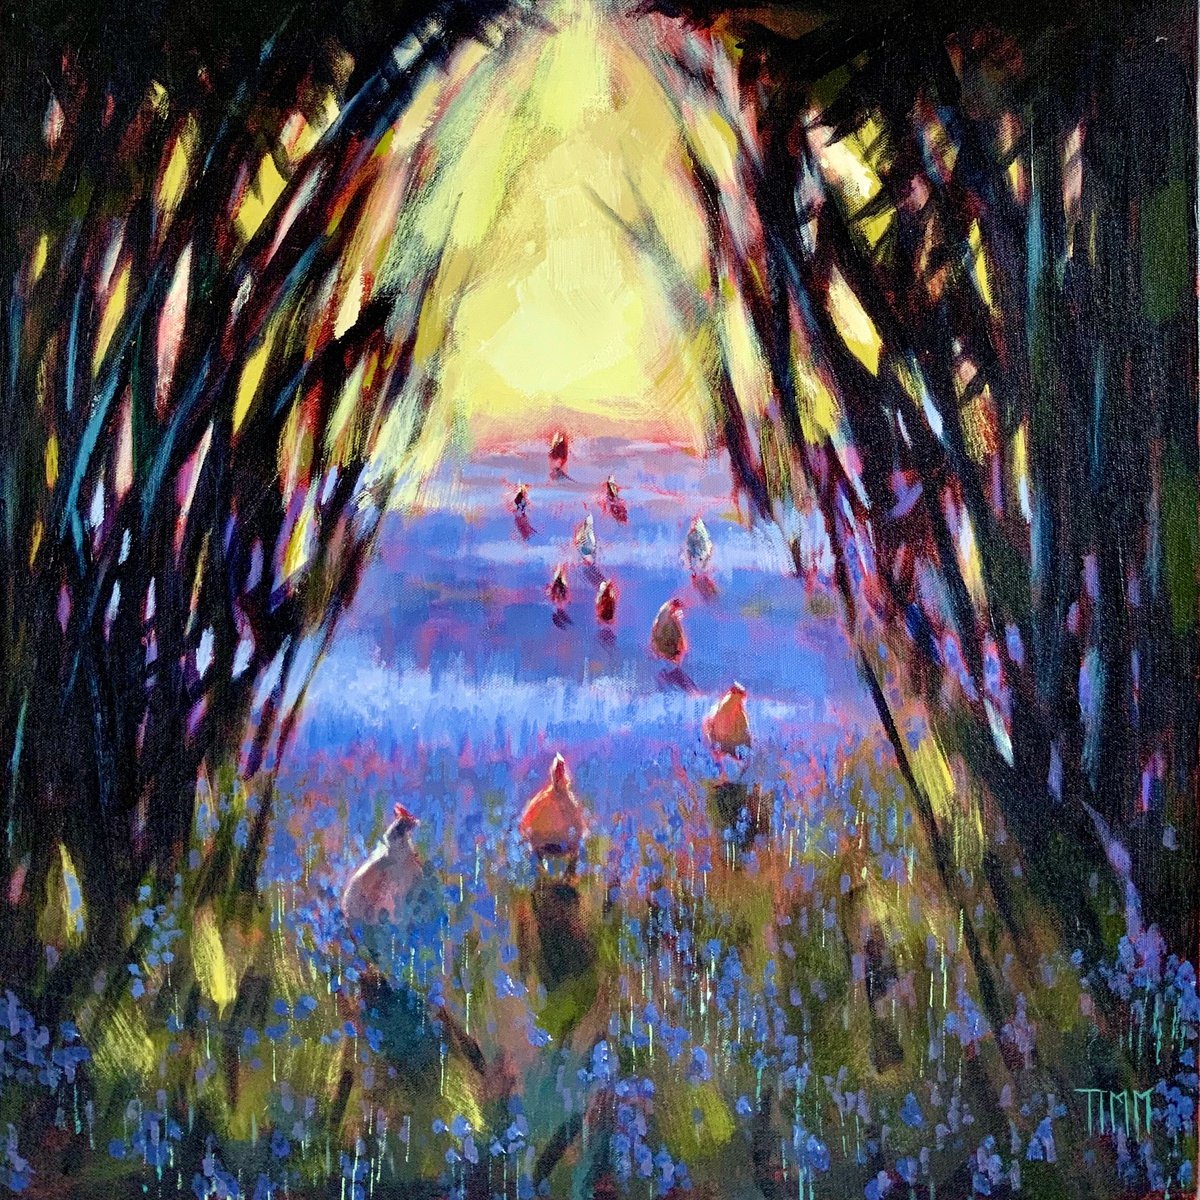 Hens In The Bluebell Woods by Lisa Timmerman